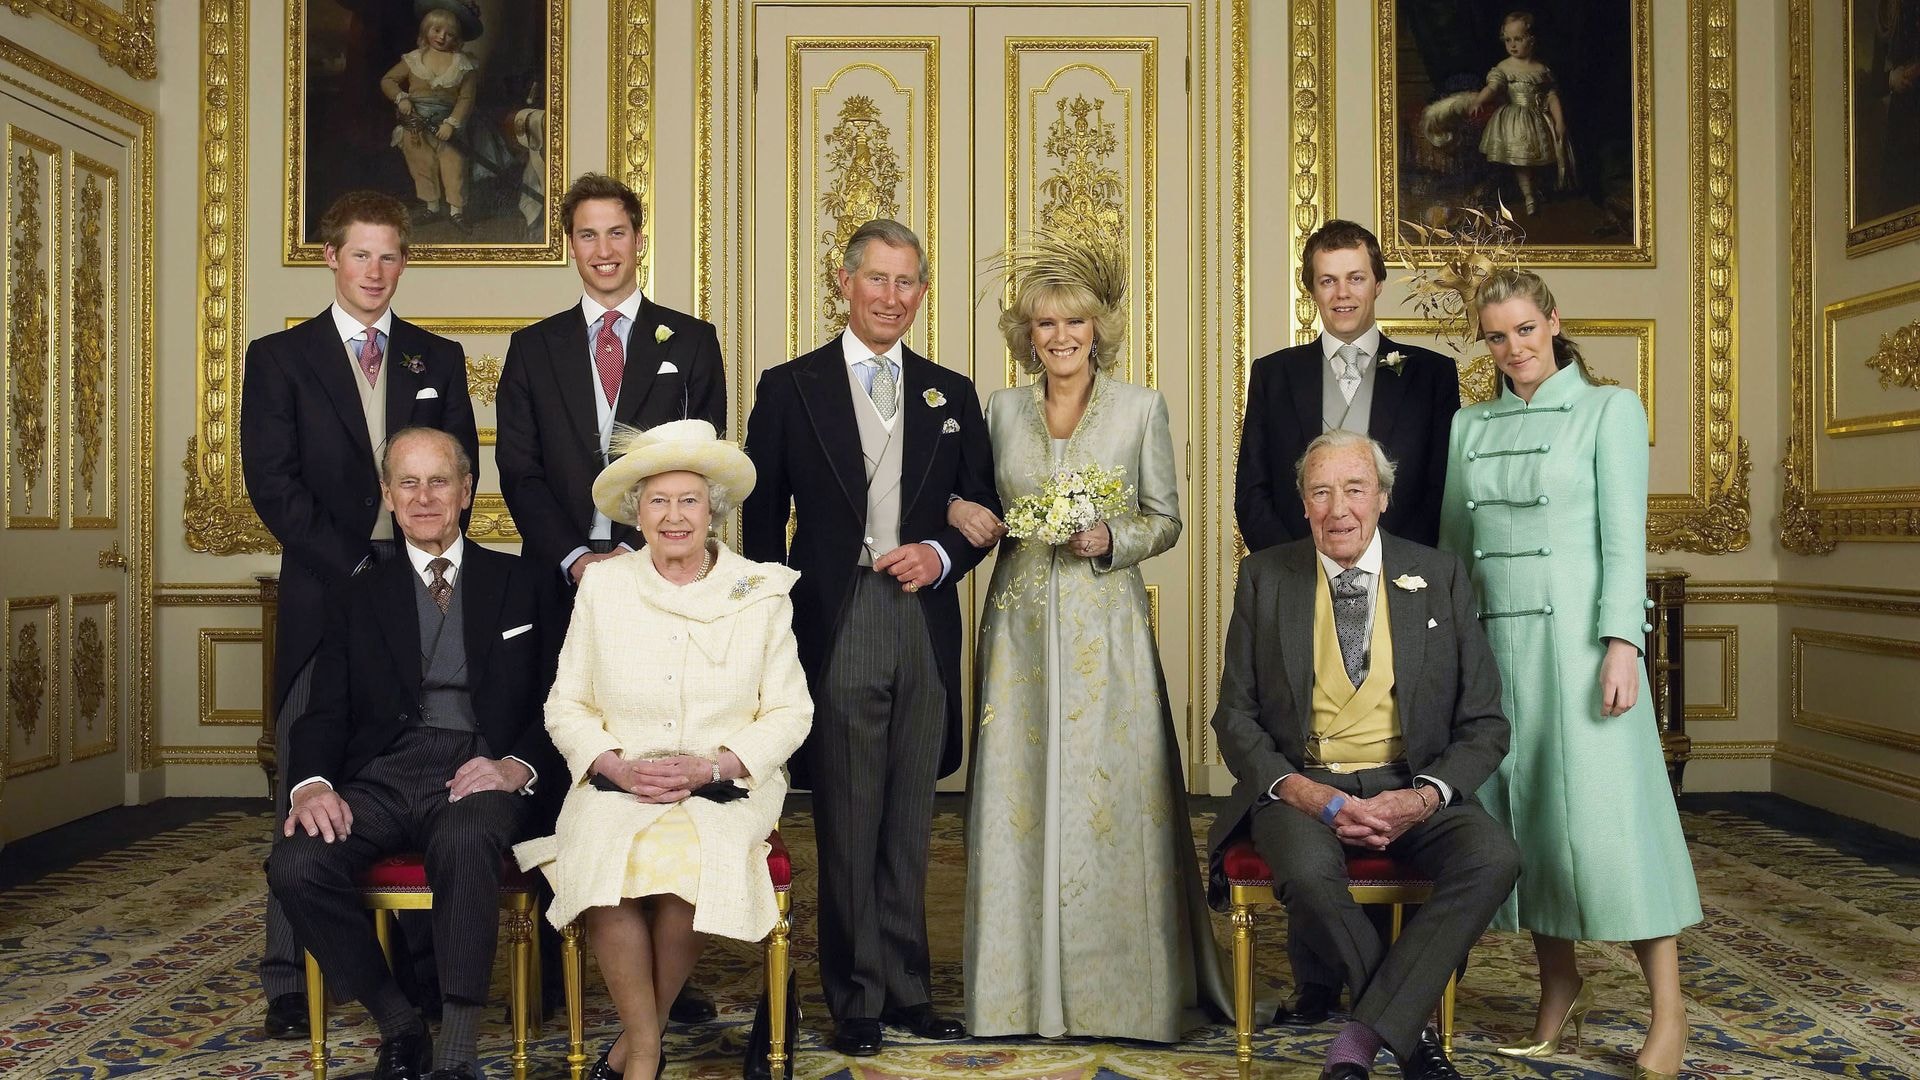 Charles and Camilla wed in 2005